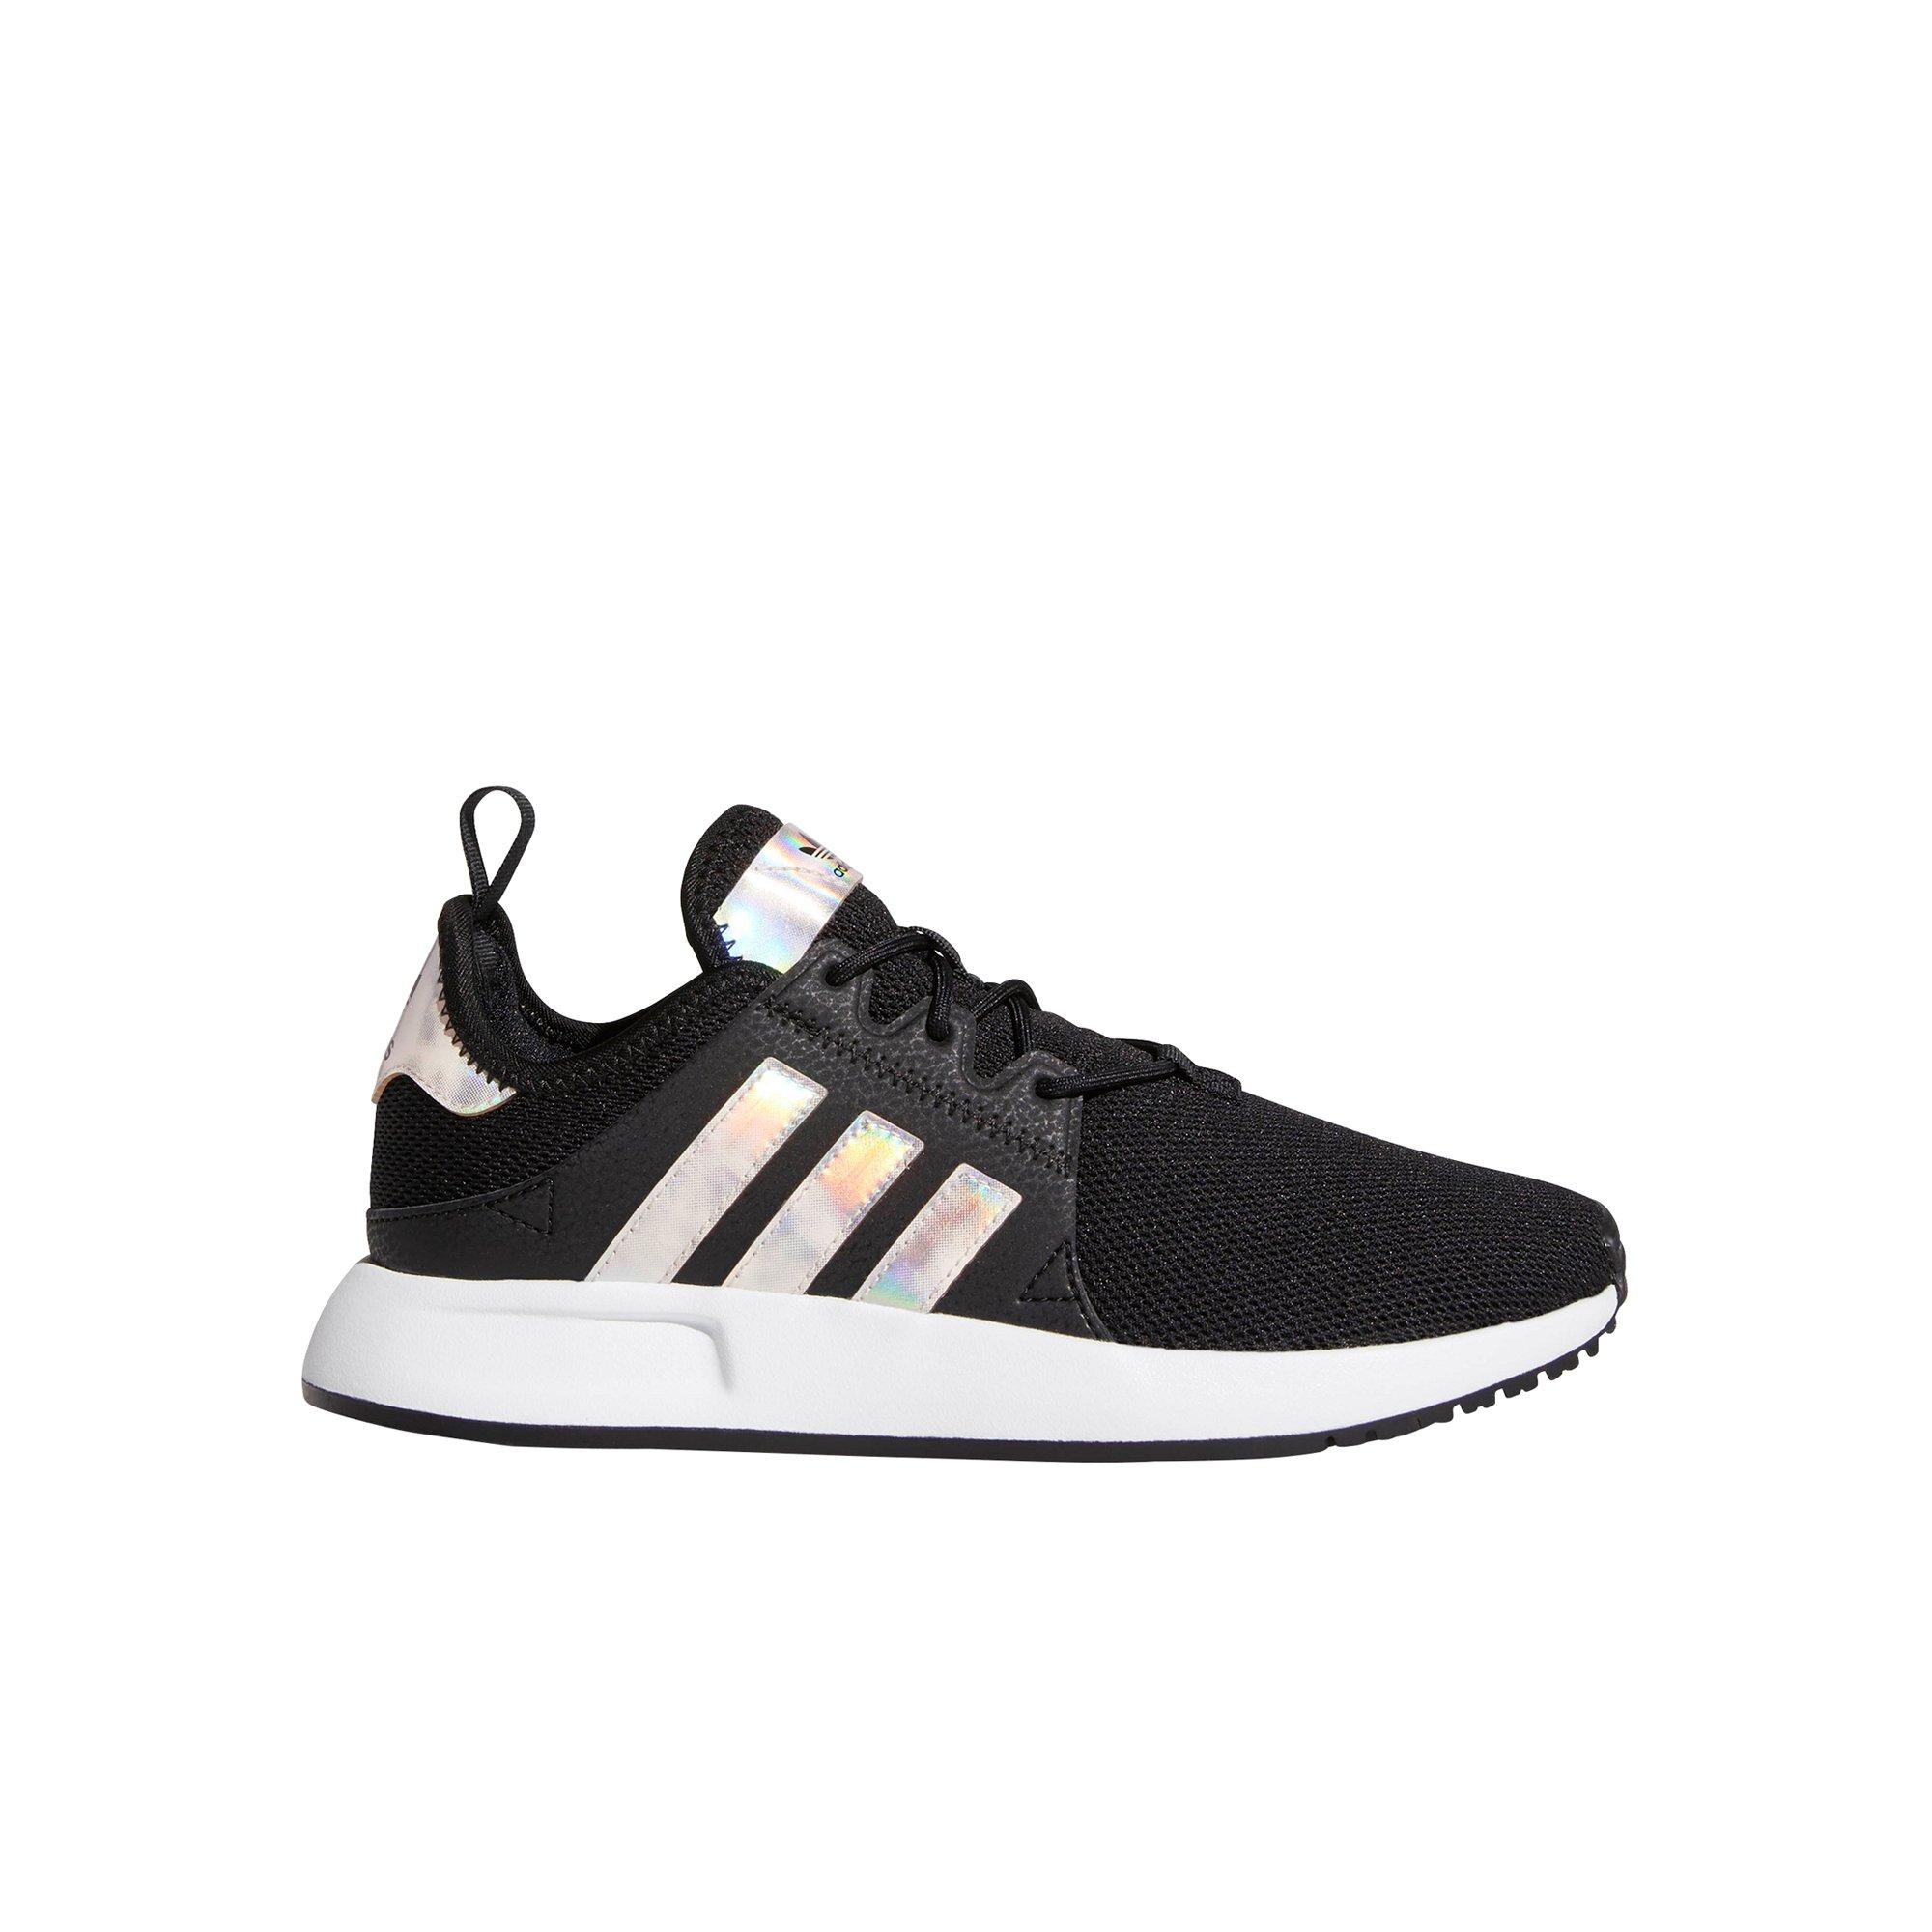 adidas shoes for girls black and white 